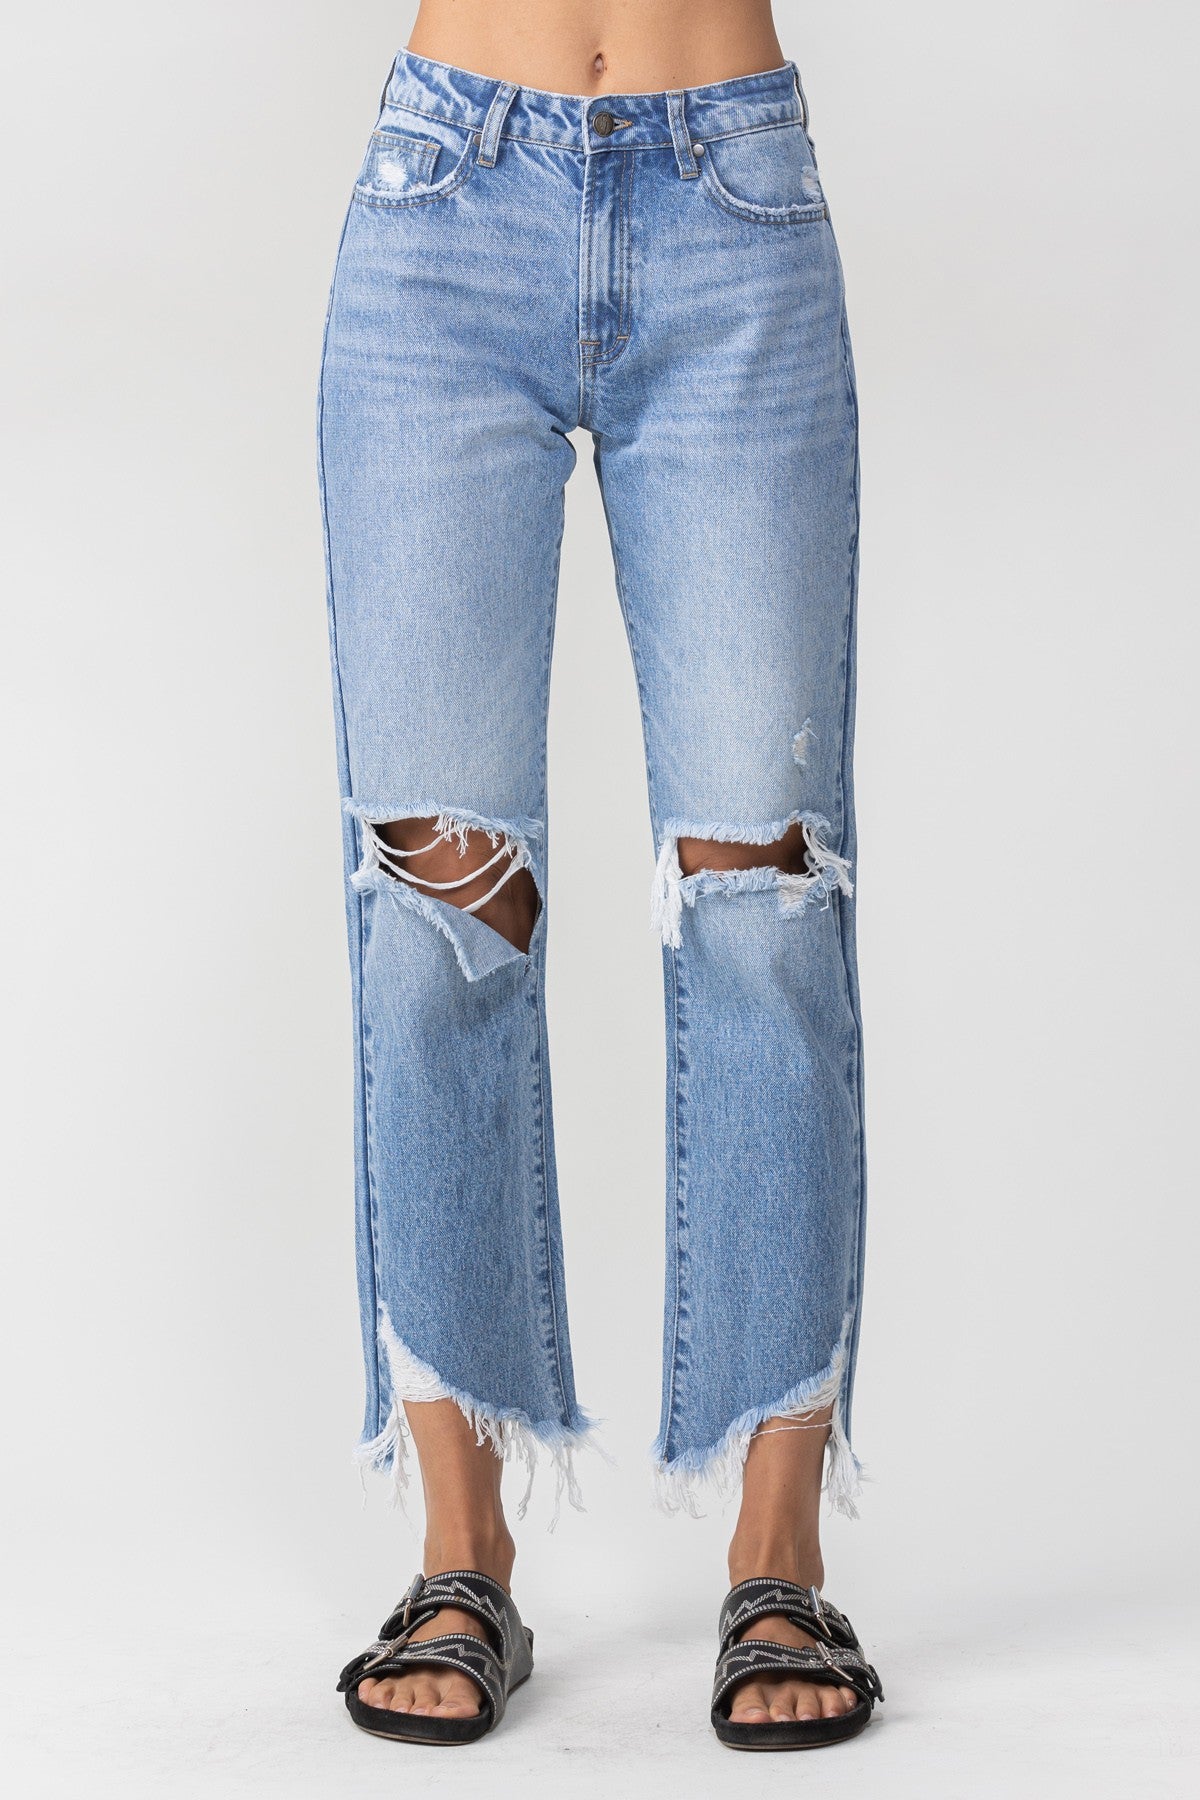 JELLY JEANS Anderson High Rise Blowout Jeans